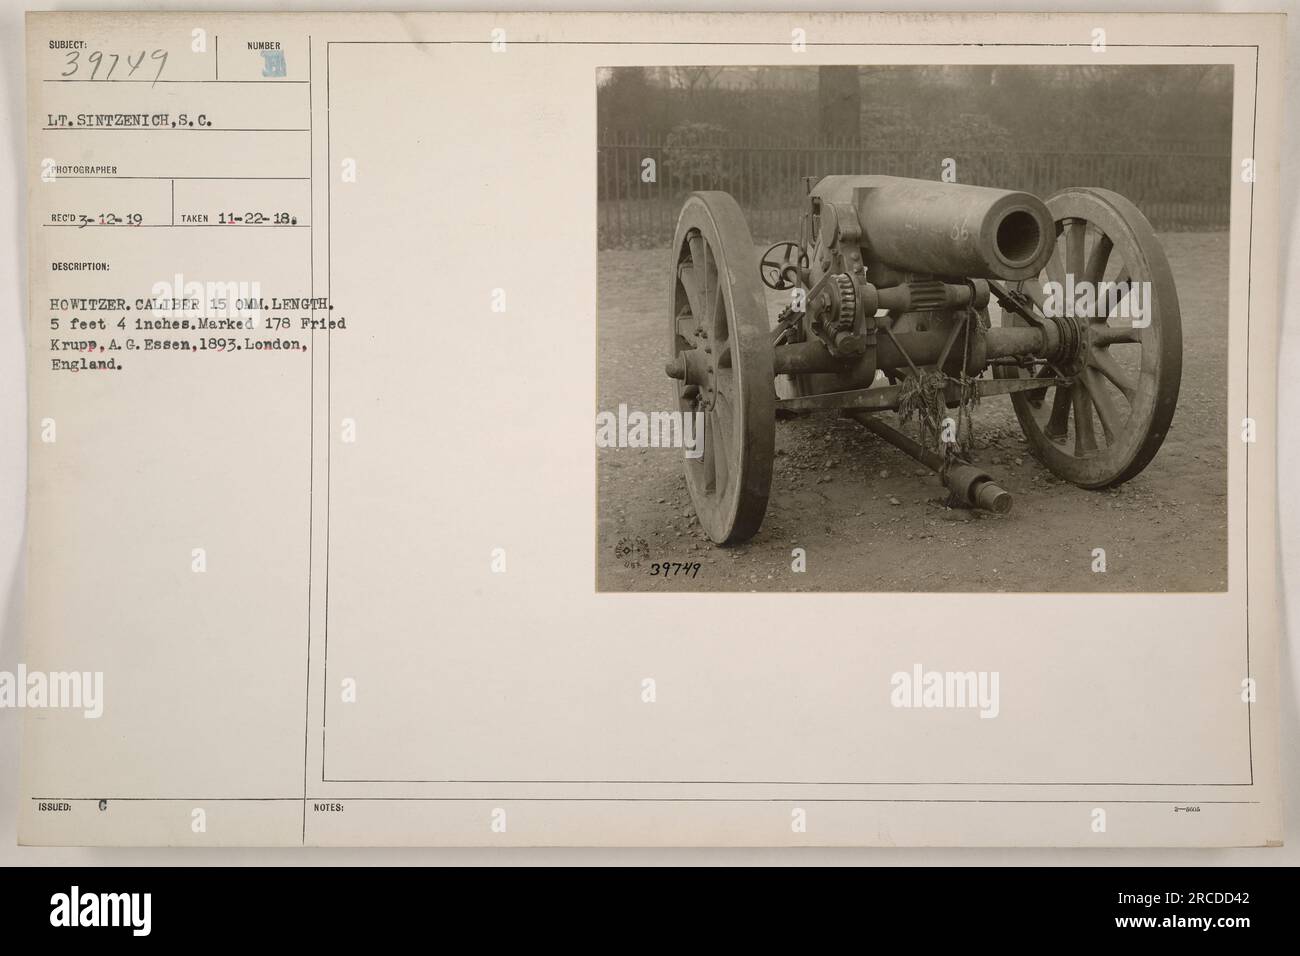 A photograph of Lieutenant Sintzenich, a photographer from the Signal Corps, capturing an image of a 15mm caliber howitzer. The howitzer is 5 feet 4 inches long and is marked as number 178, made by Fried Krupp, A.G. Essen in 1893. The photograph was taken on November 22, 1918, and the image is part of the 39749 collection. Stock Photo